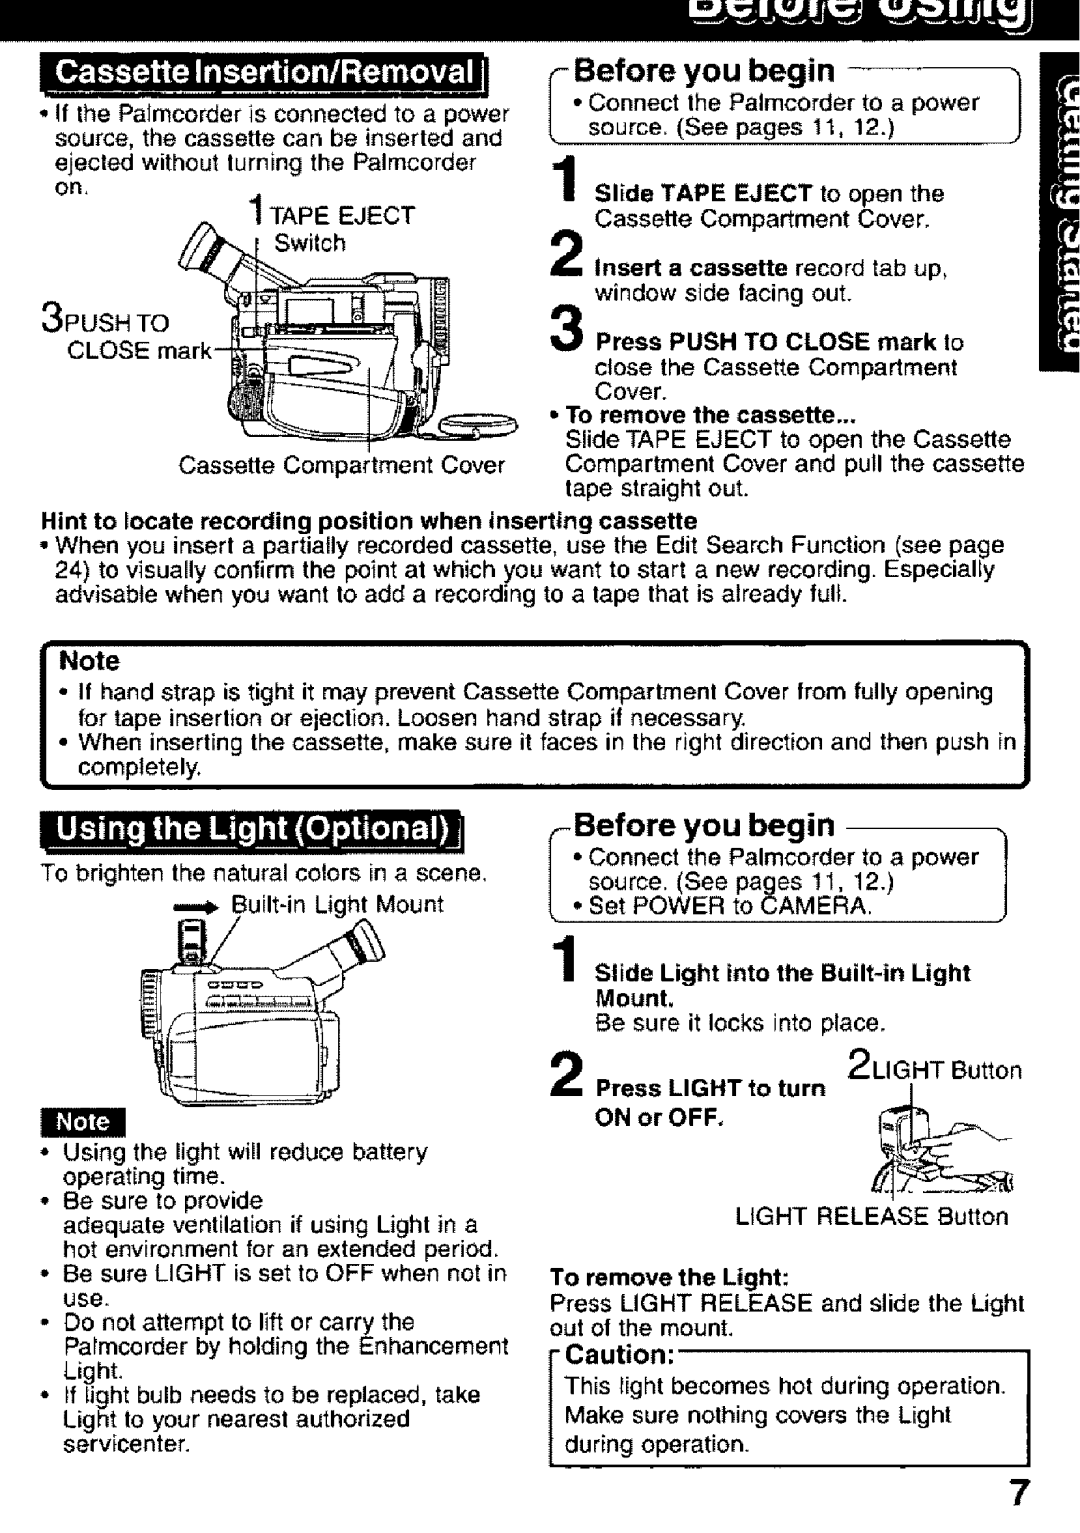 Panasonic PV-DV101 manual 3PUSH TO %, Before you begin source. See pages 11 